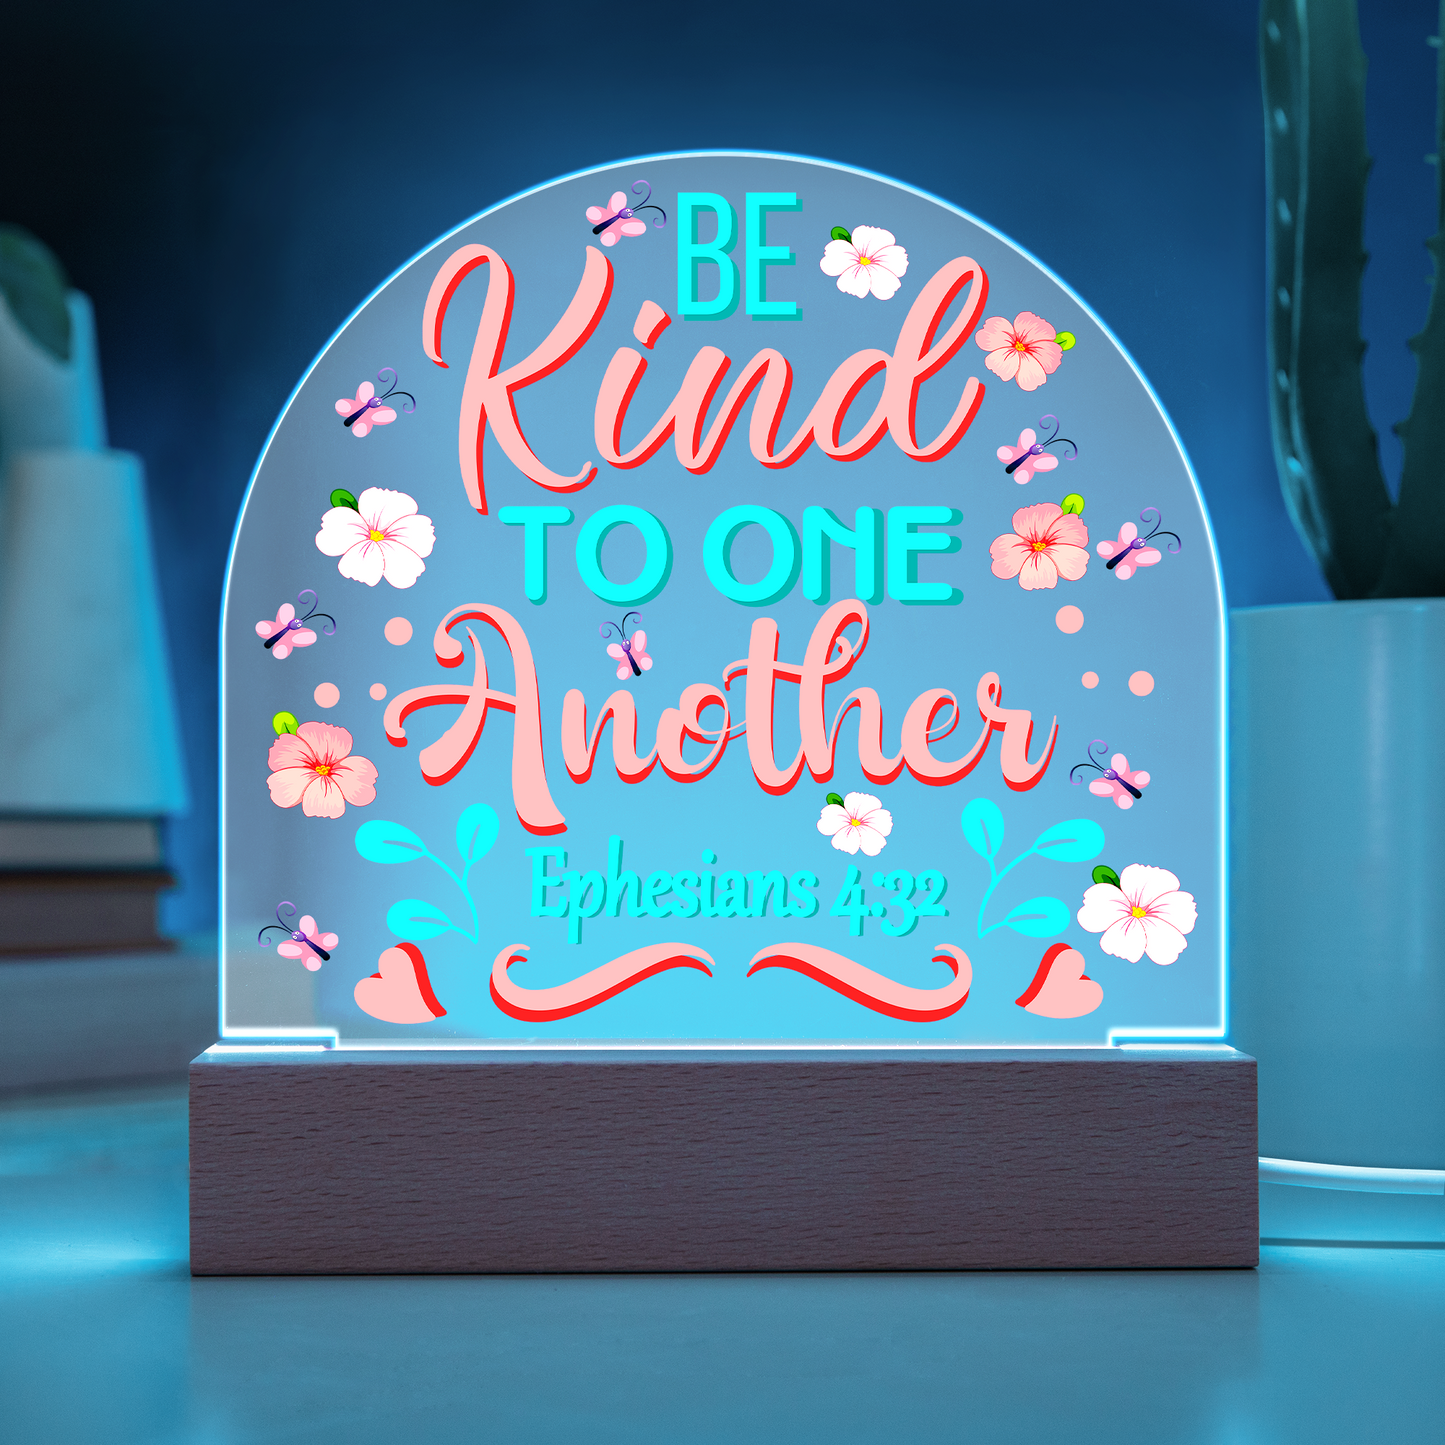 Be Kind To One Another Ephesians 4:32 Christian Bible Verse Scripture Acrylic Plaque With Wooden Base